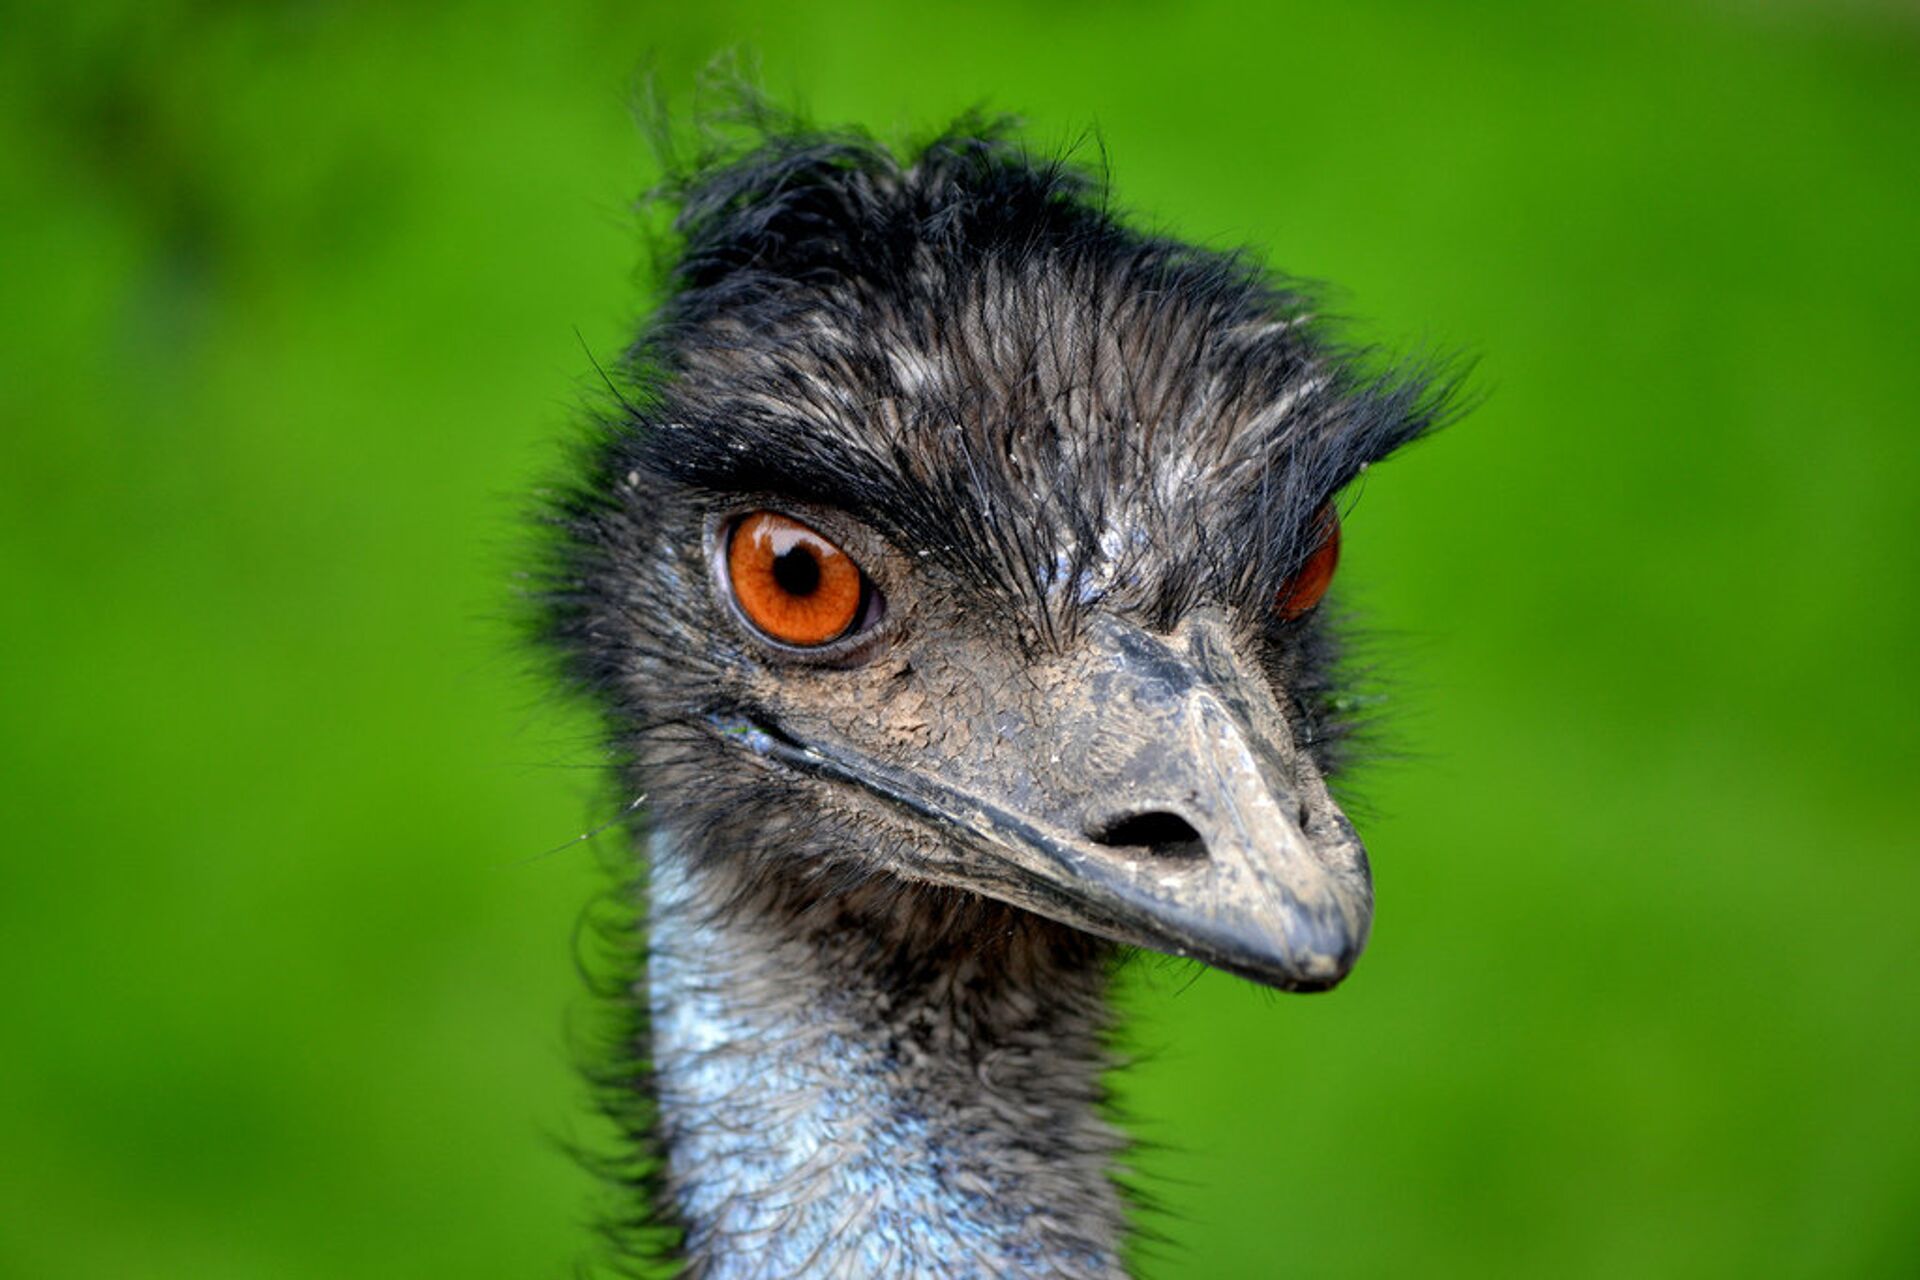 It is believed that the emu is a survivor of prehistoric times and dates back some 80 million years roaming the outback of Australia. The Aborigine tribes relied upon the emu for their existence. - Sputnik International, 1920, 17.09.2021